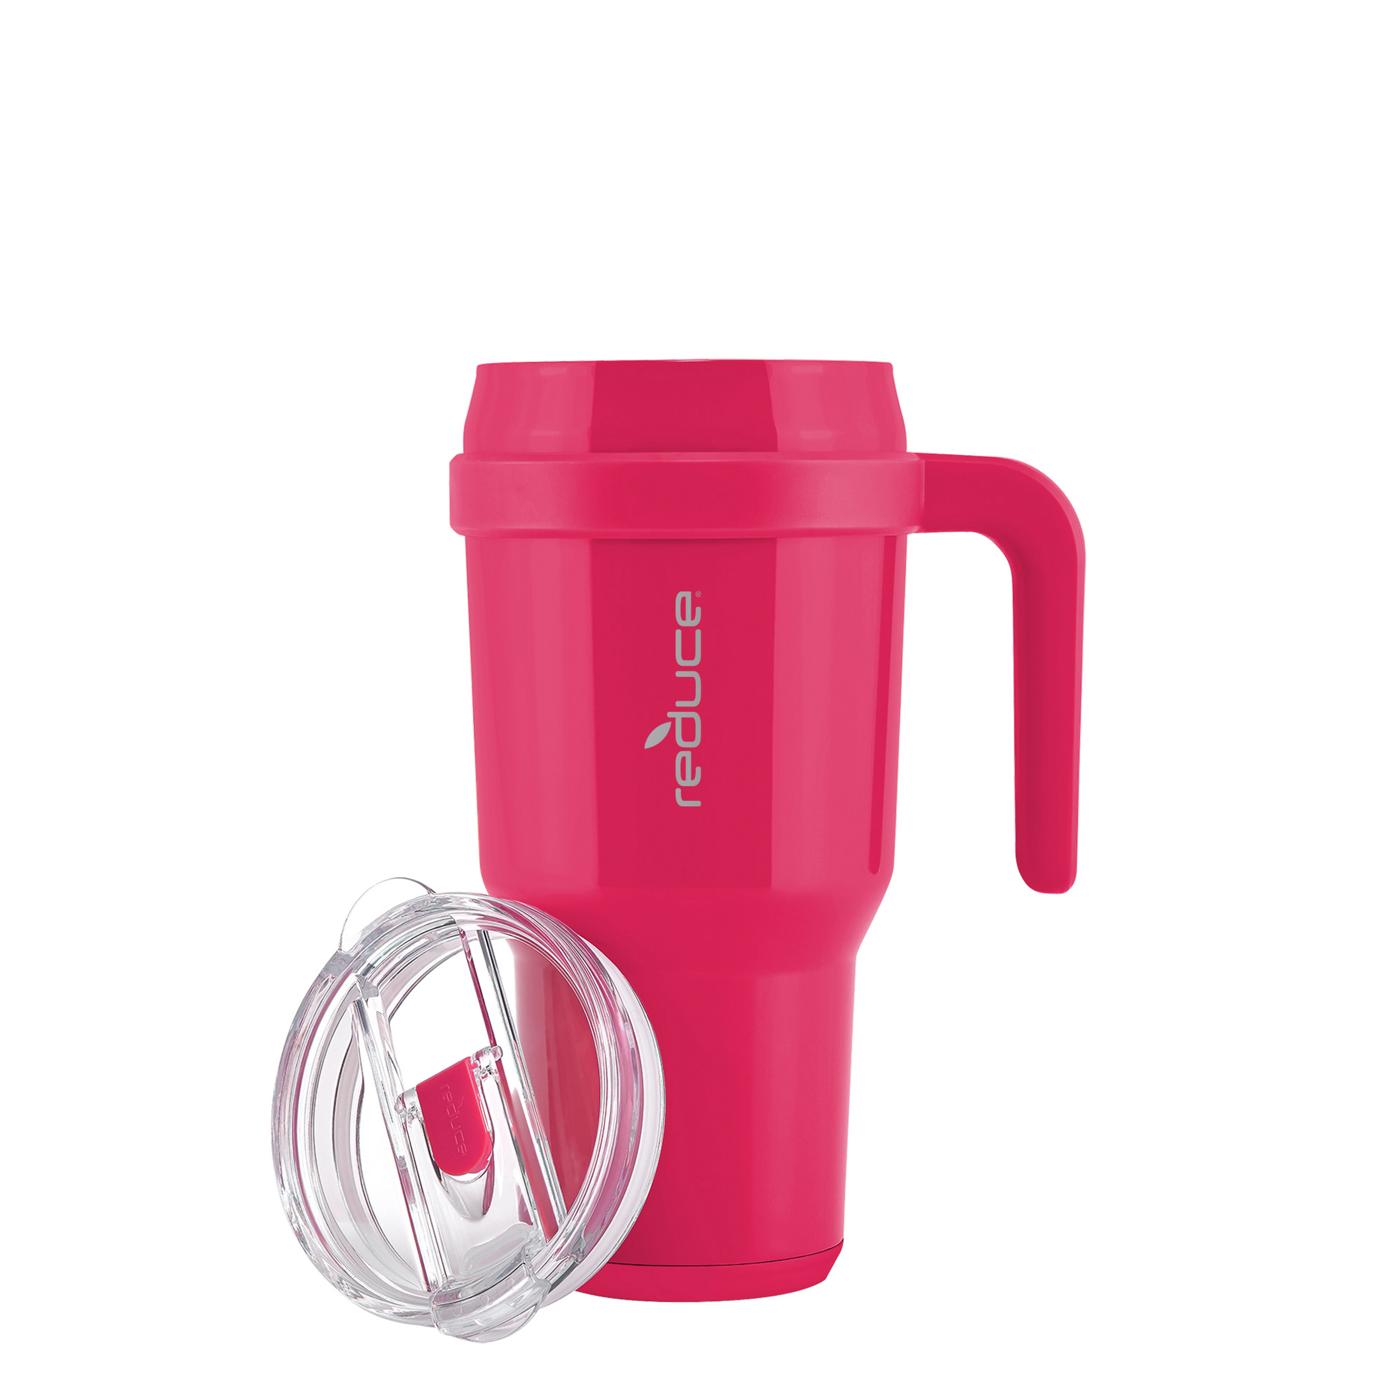 Reduce Cold1 Vacuum Insulated Stainless Steel Mug with Lid & Straw